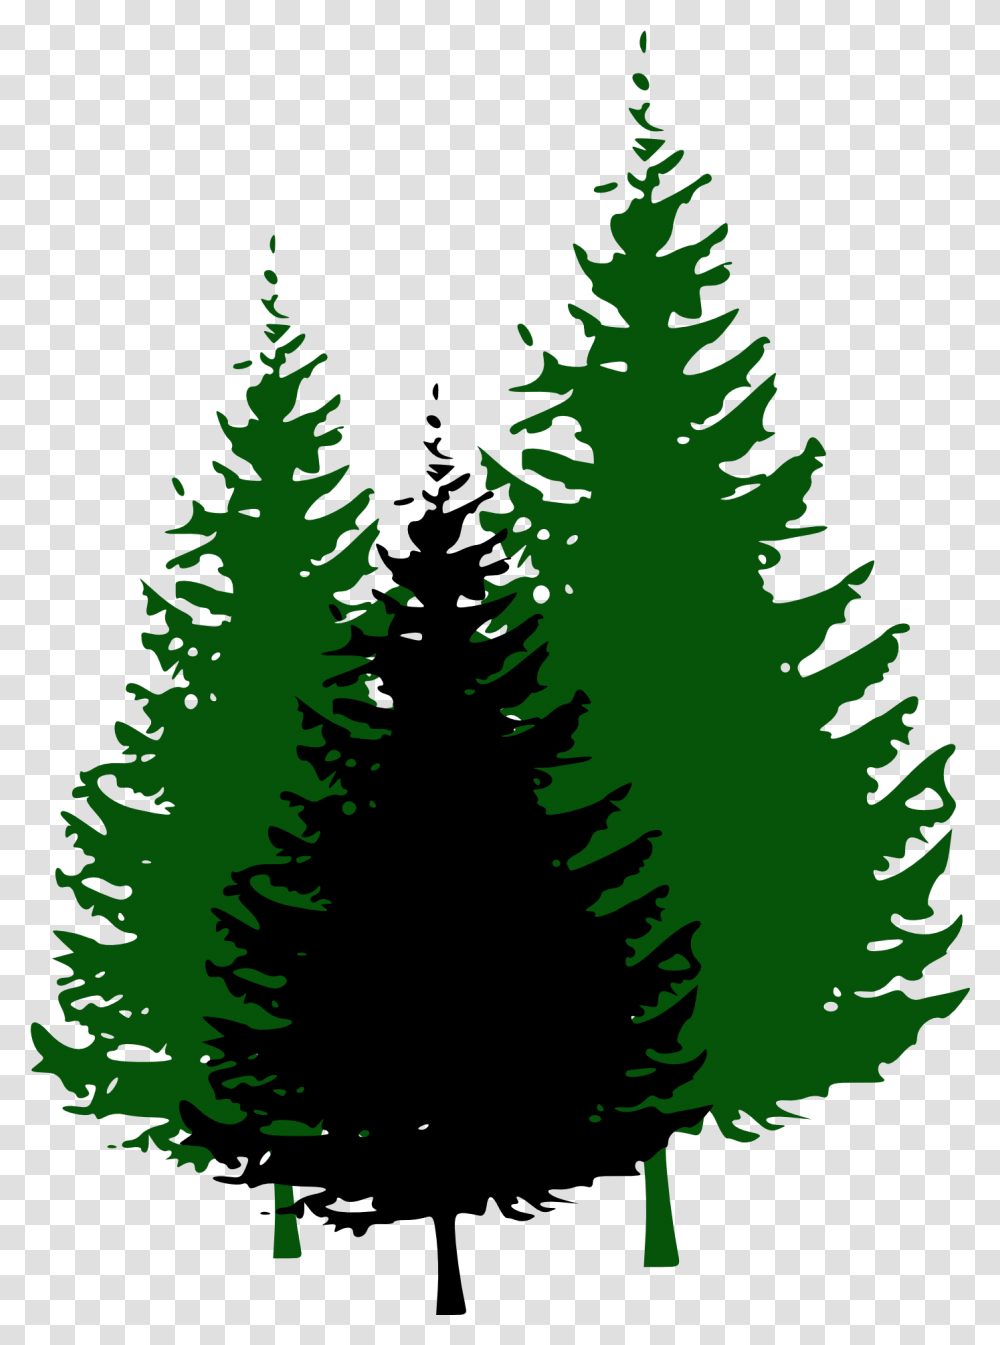 Green Christmas Tree Silhouettes Clipart Pine Tree Silhouette, Plant, Fir, Abies, Conifer Transparent Png